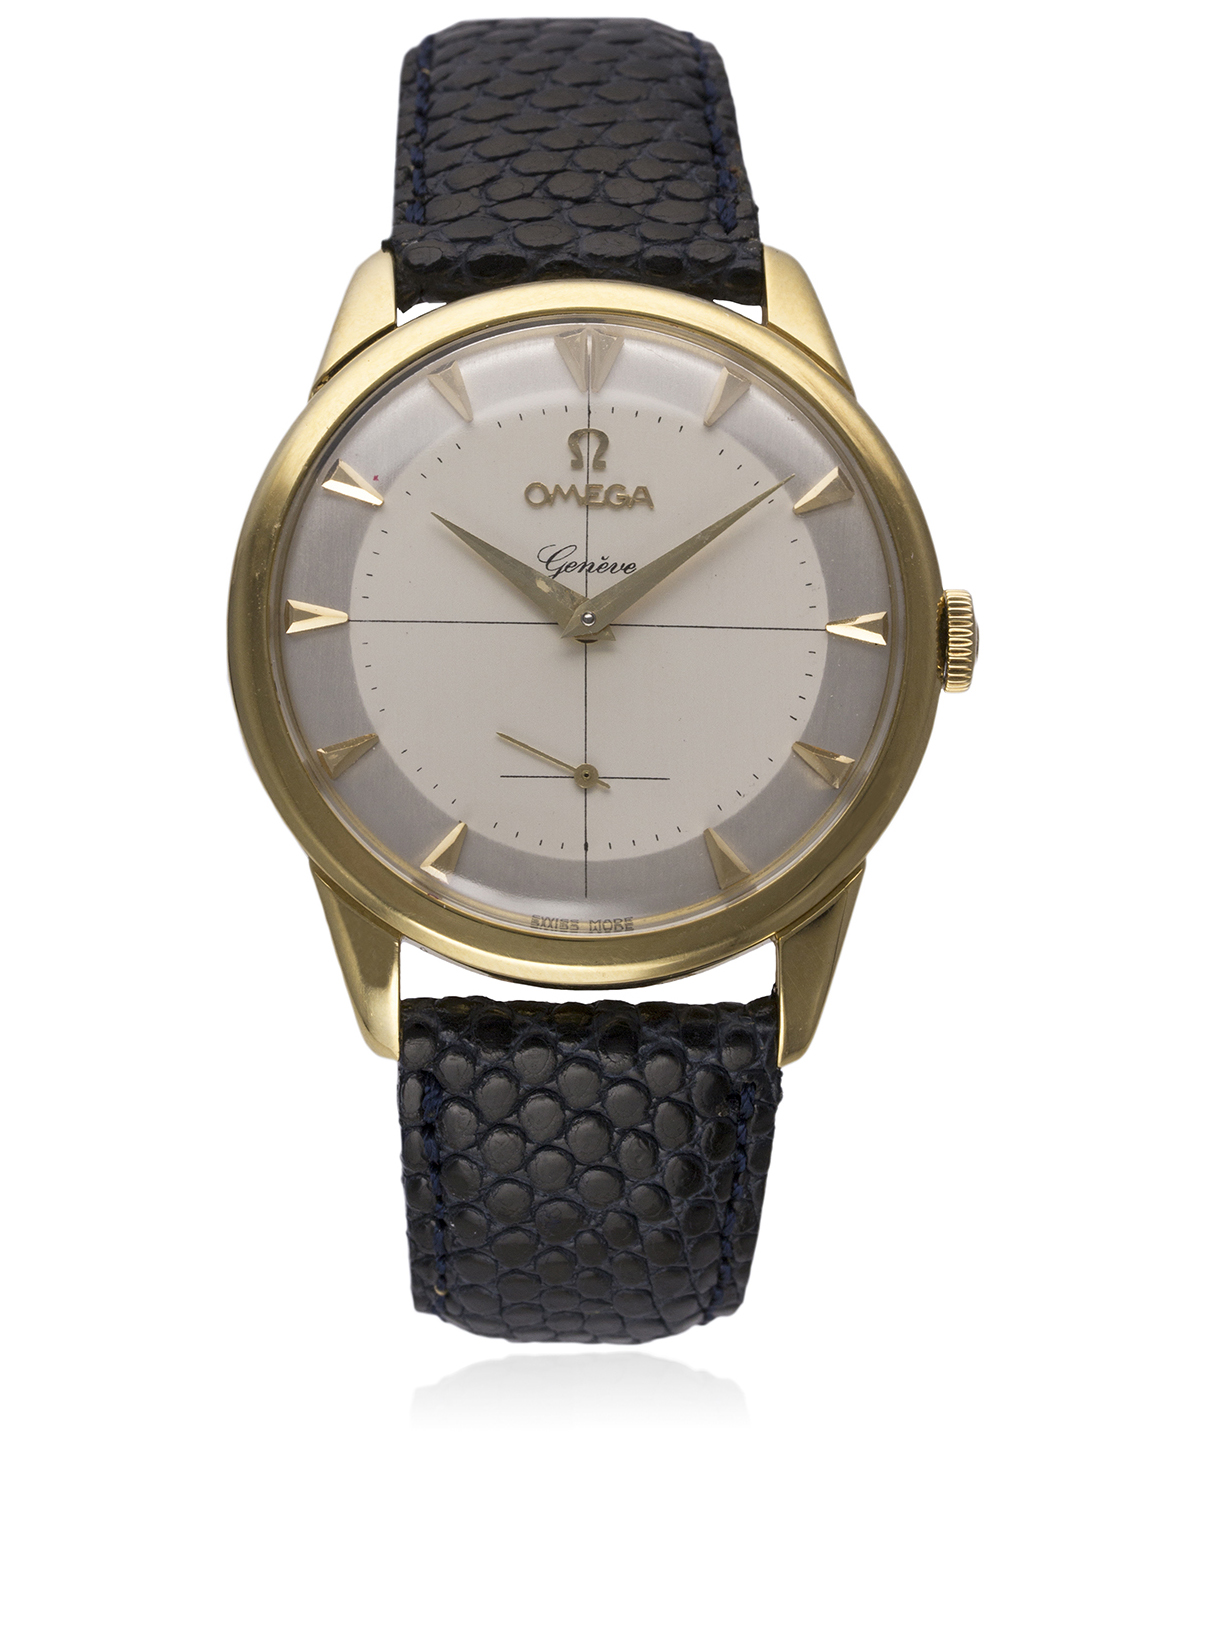 A GENTLEMAN'S 18K SOLID GOLD OMEGA GENEVE WRIST WATCH CIRCA 1954, REF. 2748 D: Two tone silver cross